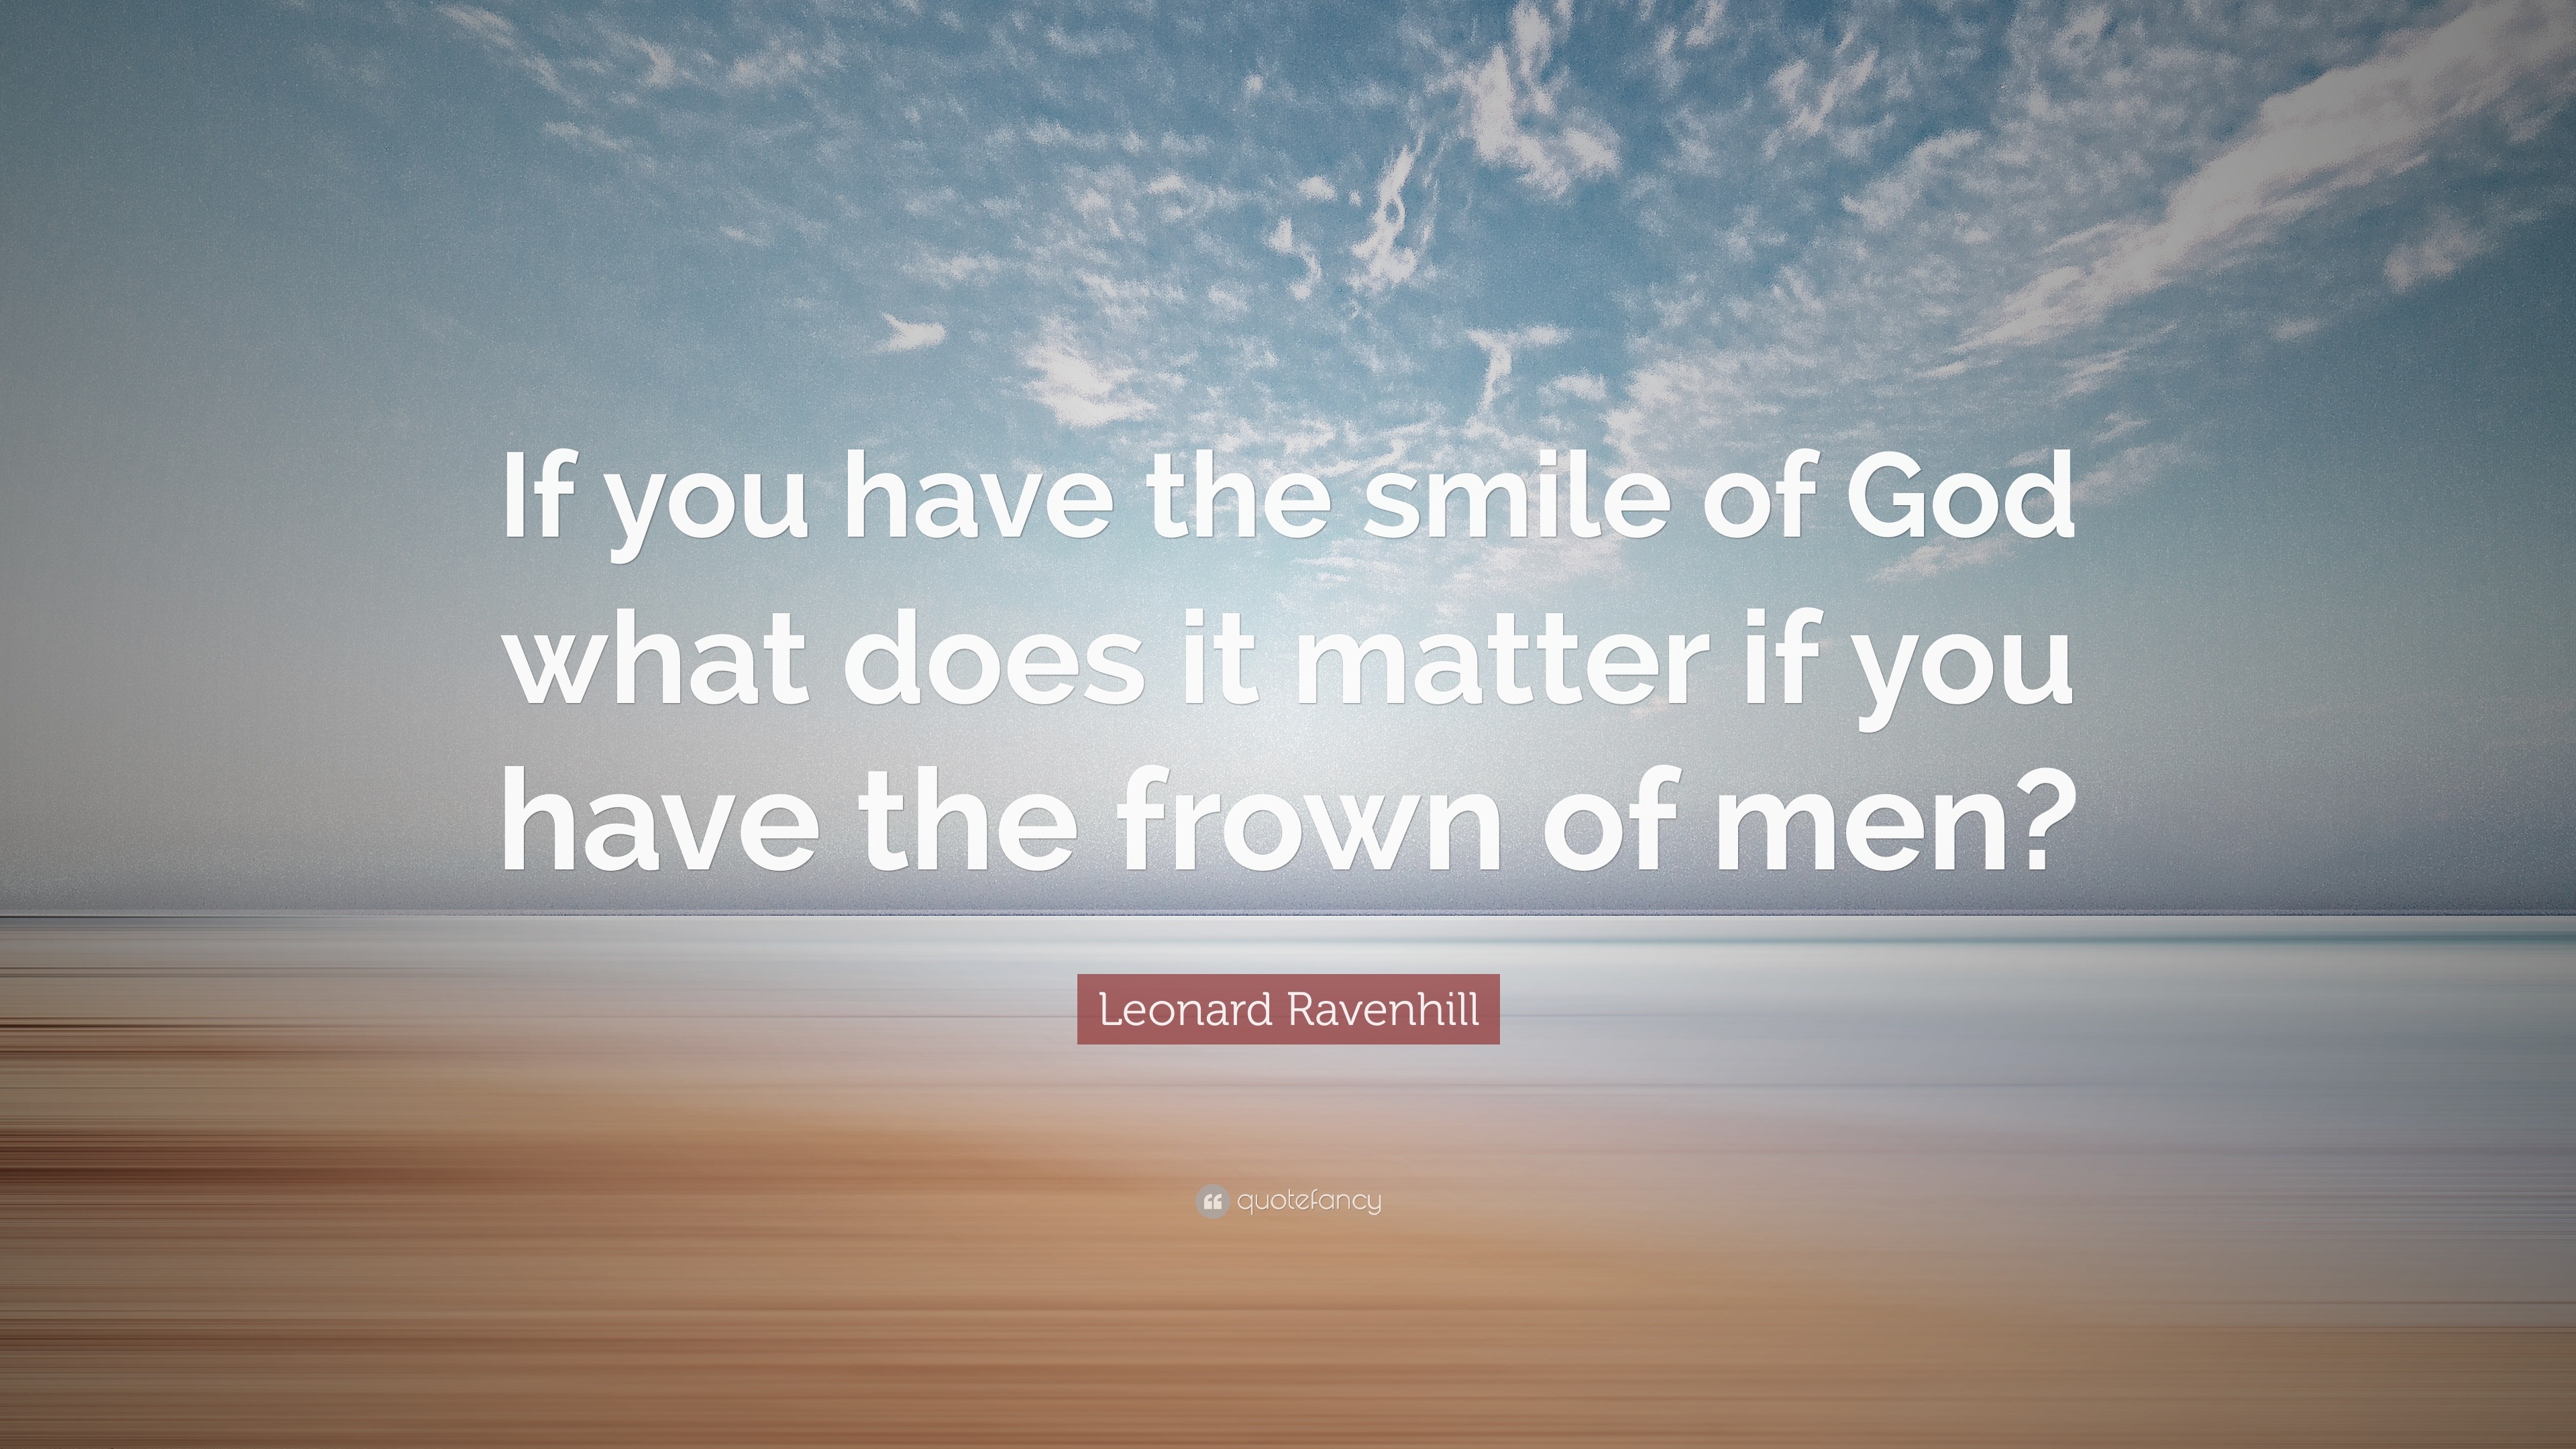 Leonard Ravenhill Quote: “If you have the smile of God what does it matter  if you